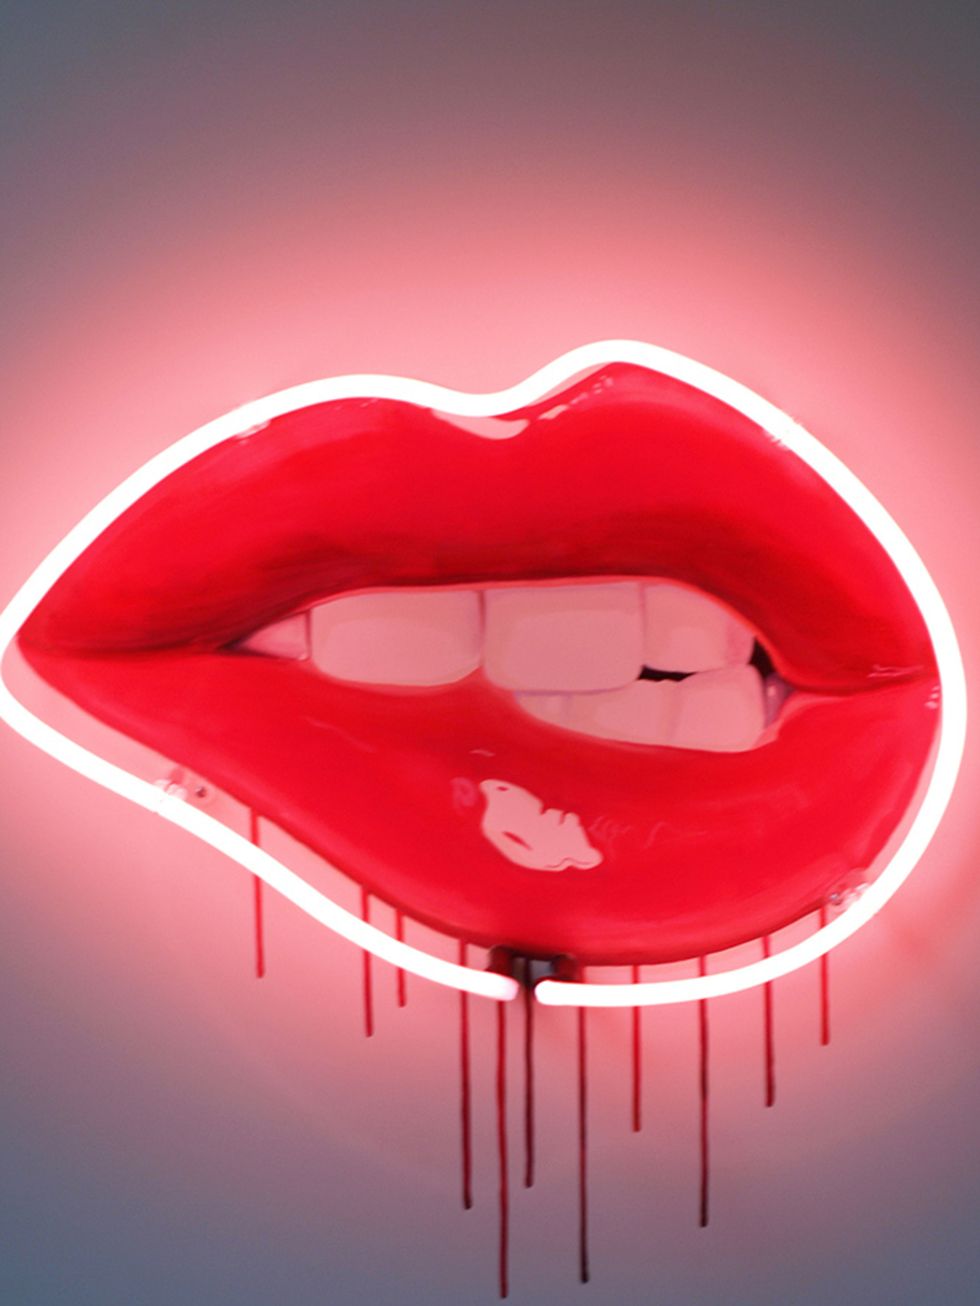 <p>ART: Lights of Soho LOVE Hz</p>

<p>Fact: no one likes Valentine&rsquo;s. For coupled-up folks, it&rsquo;s too corny, expensive, hyped, fraught with disappointment&hellip; (delete as appropriate). And for singles? Well, let&rsquo;s just say it most lik